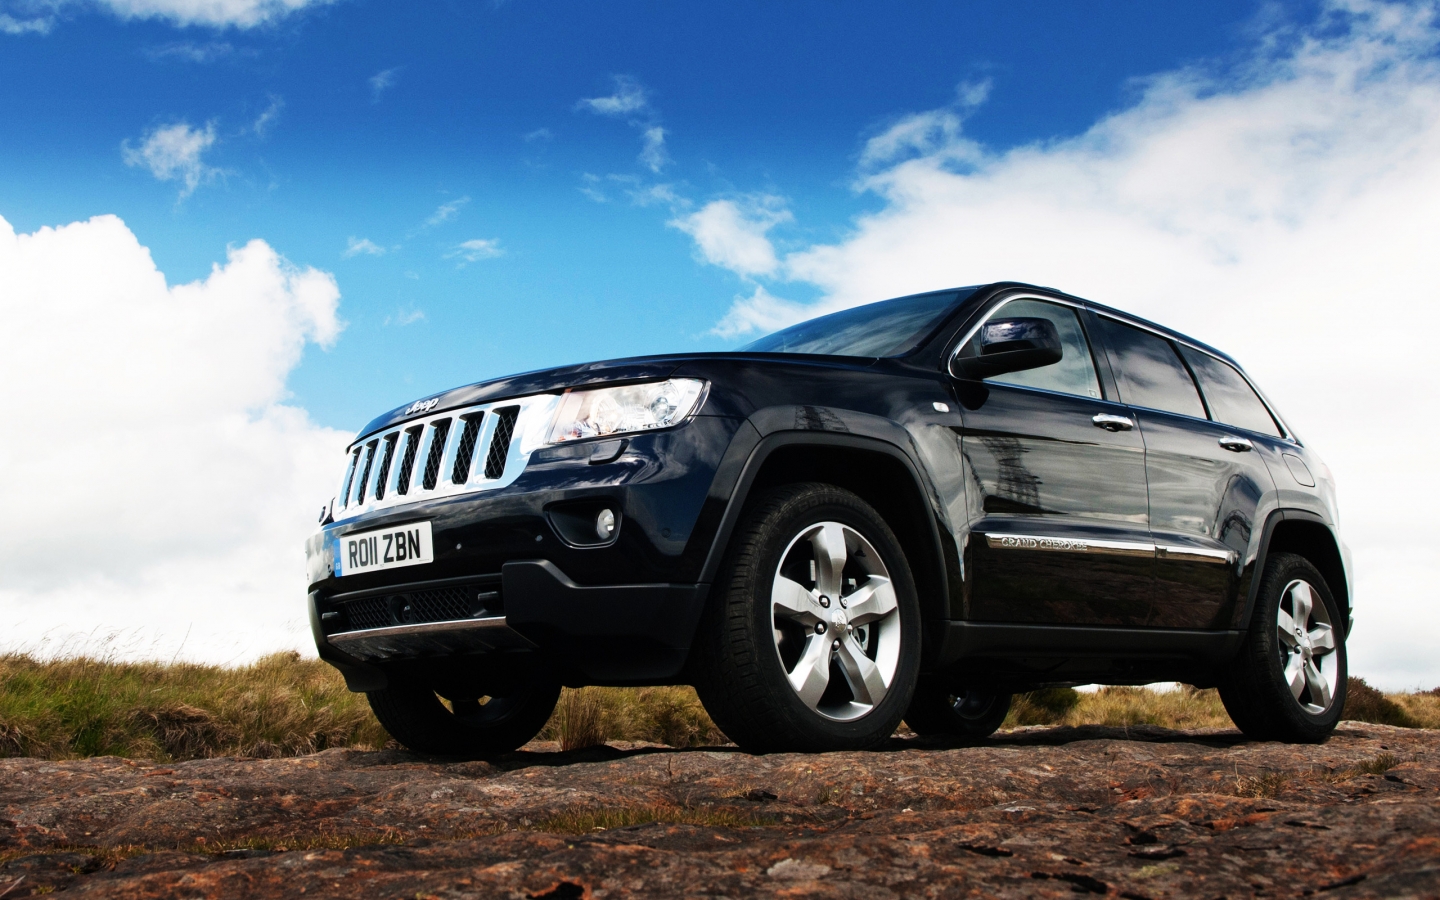 2011 Jeep Grand Cherokee for 1440 x 900 widescreen resolution